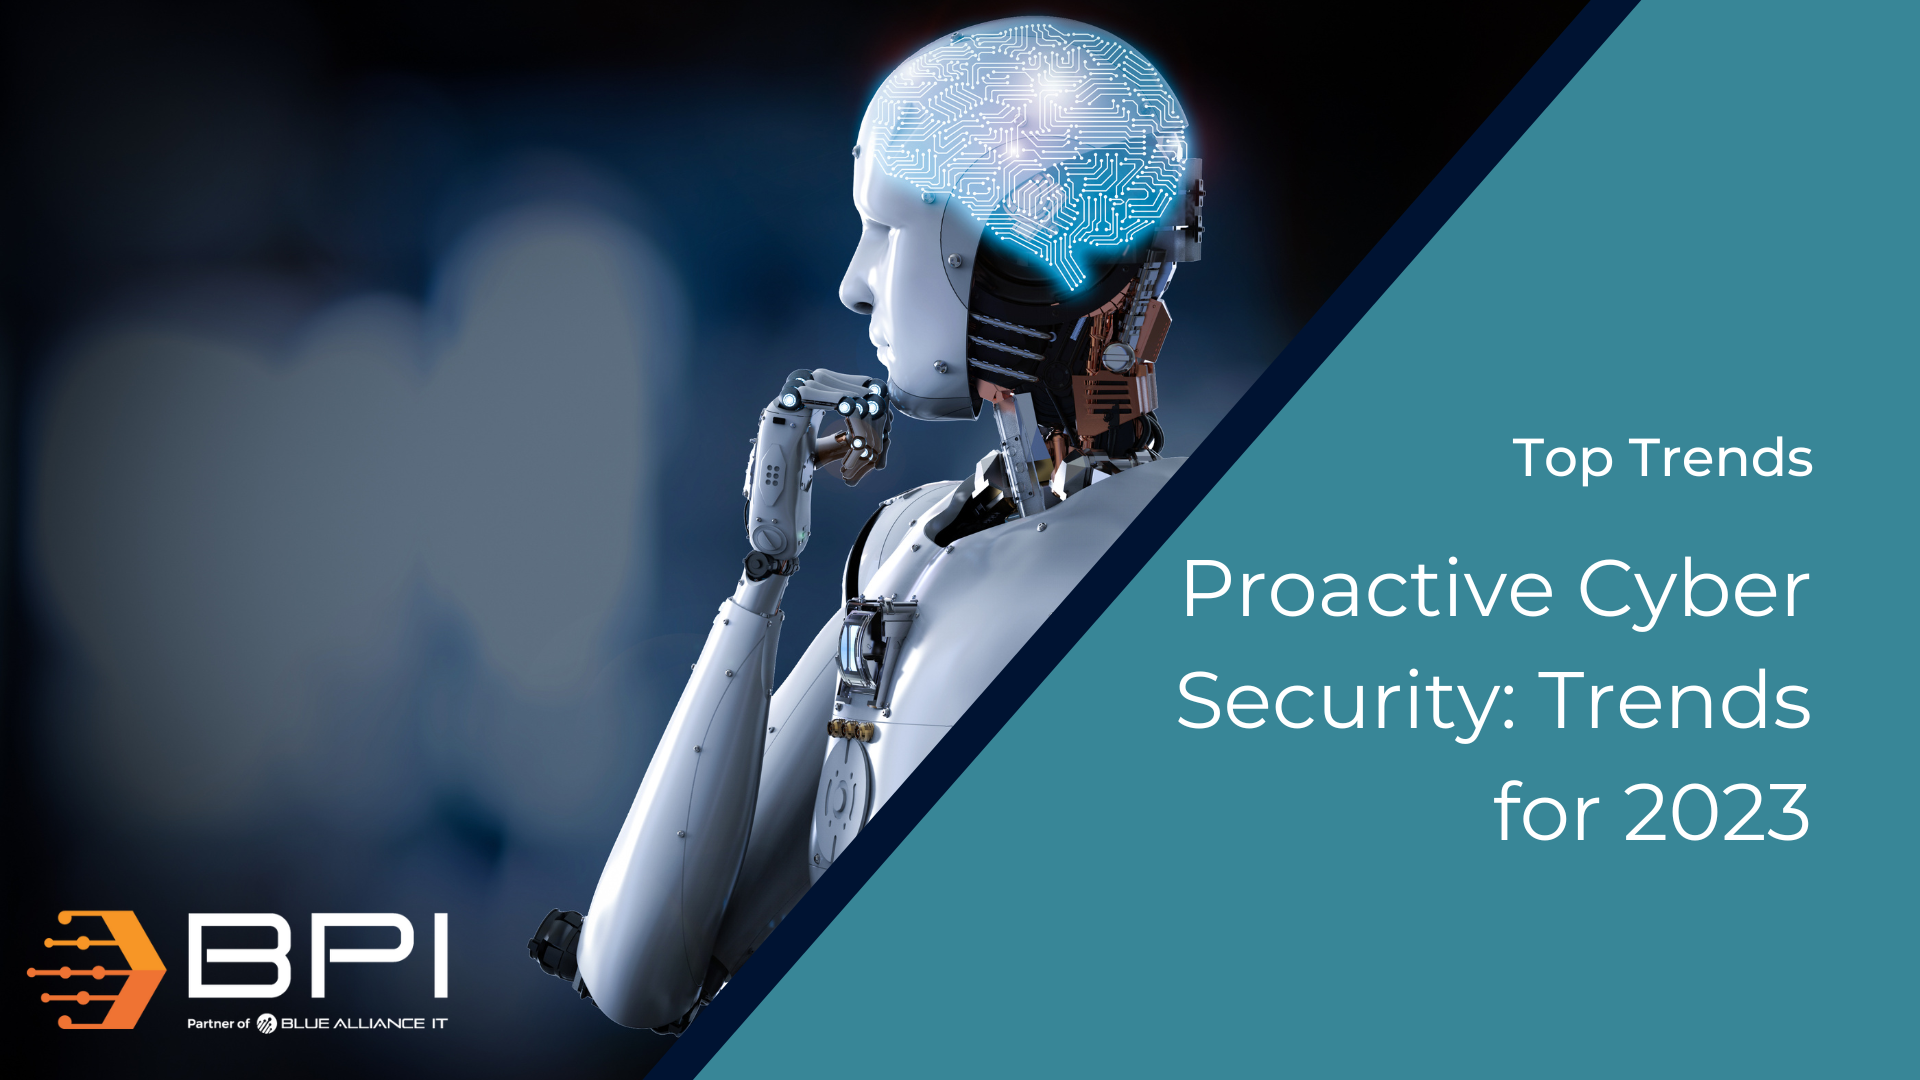 Proactive Cyber Security